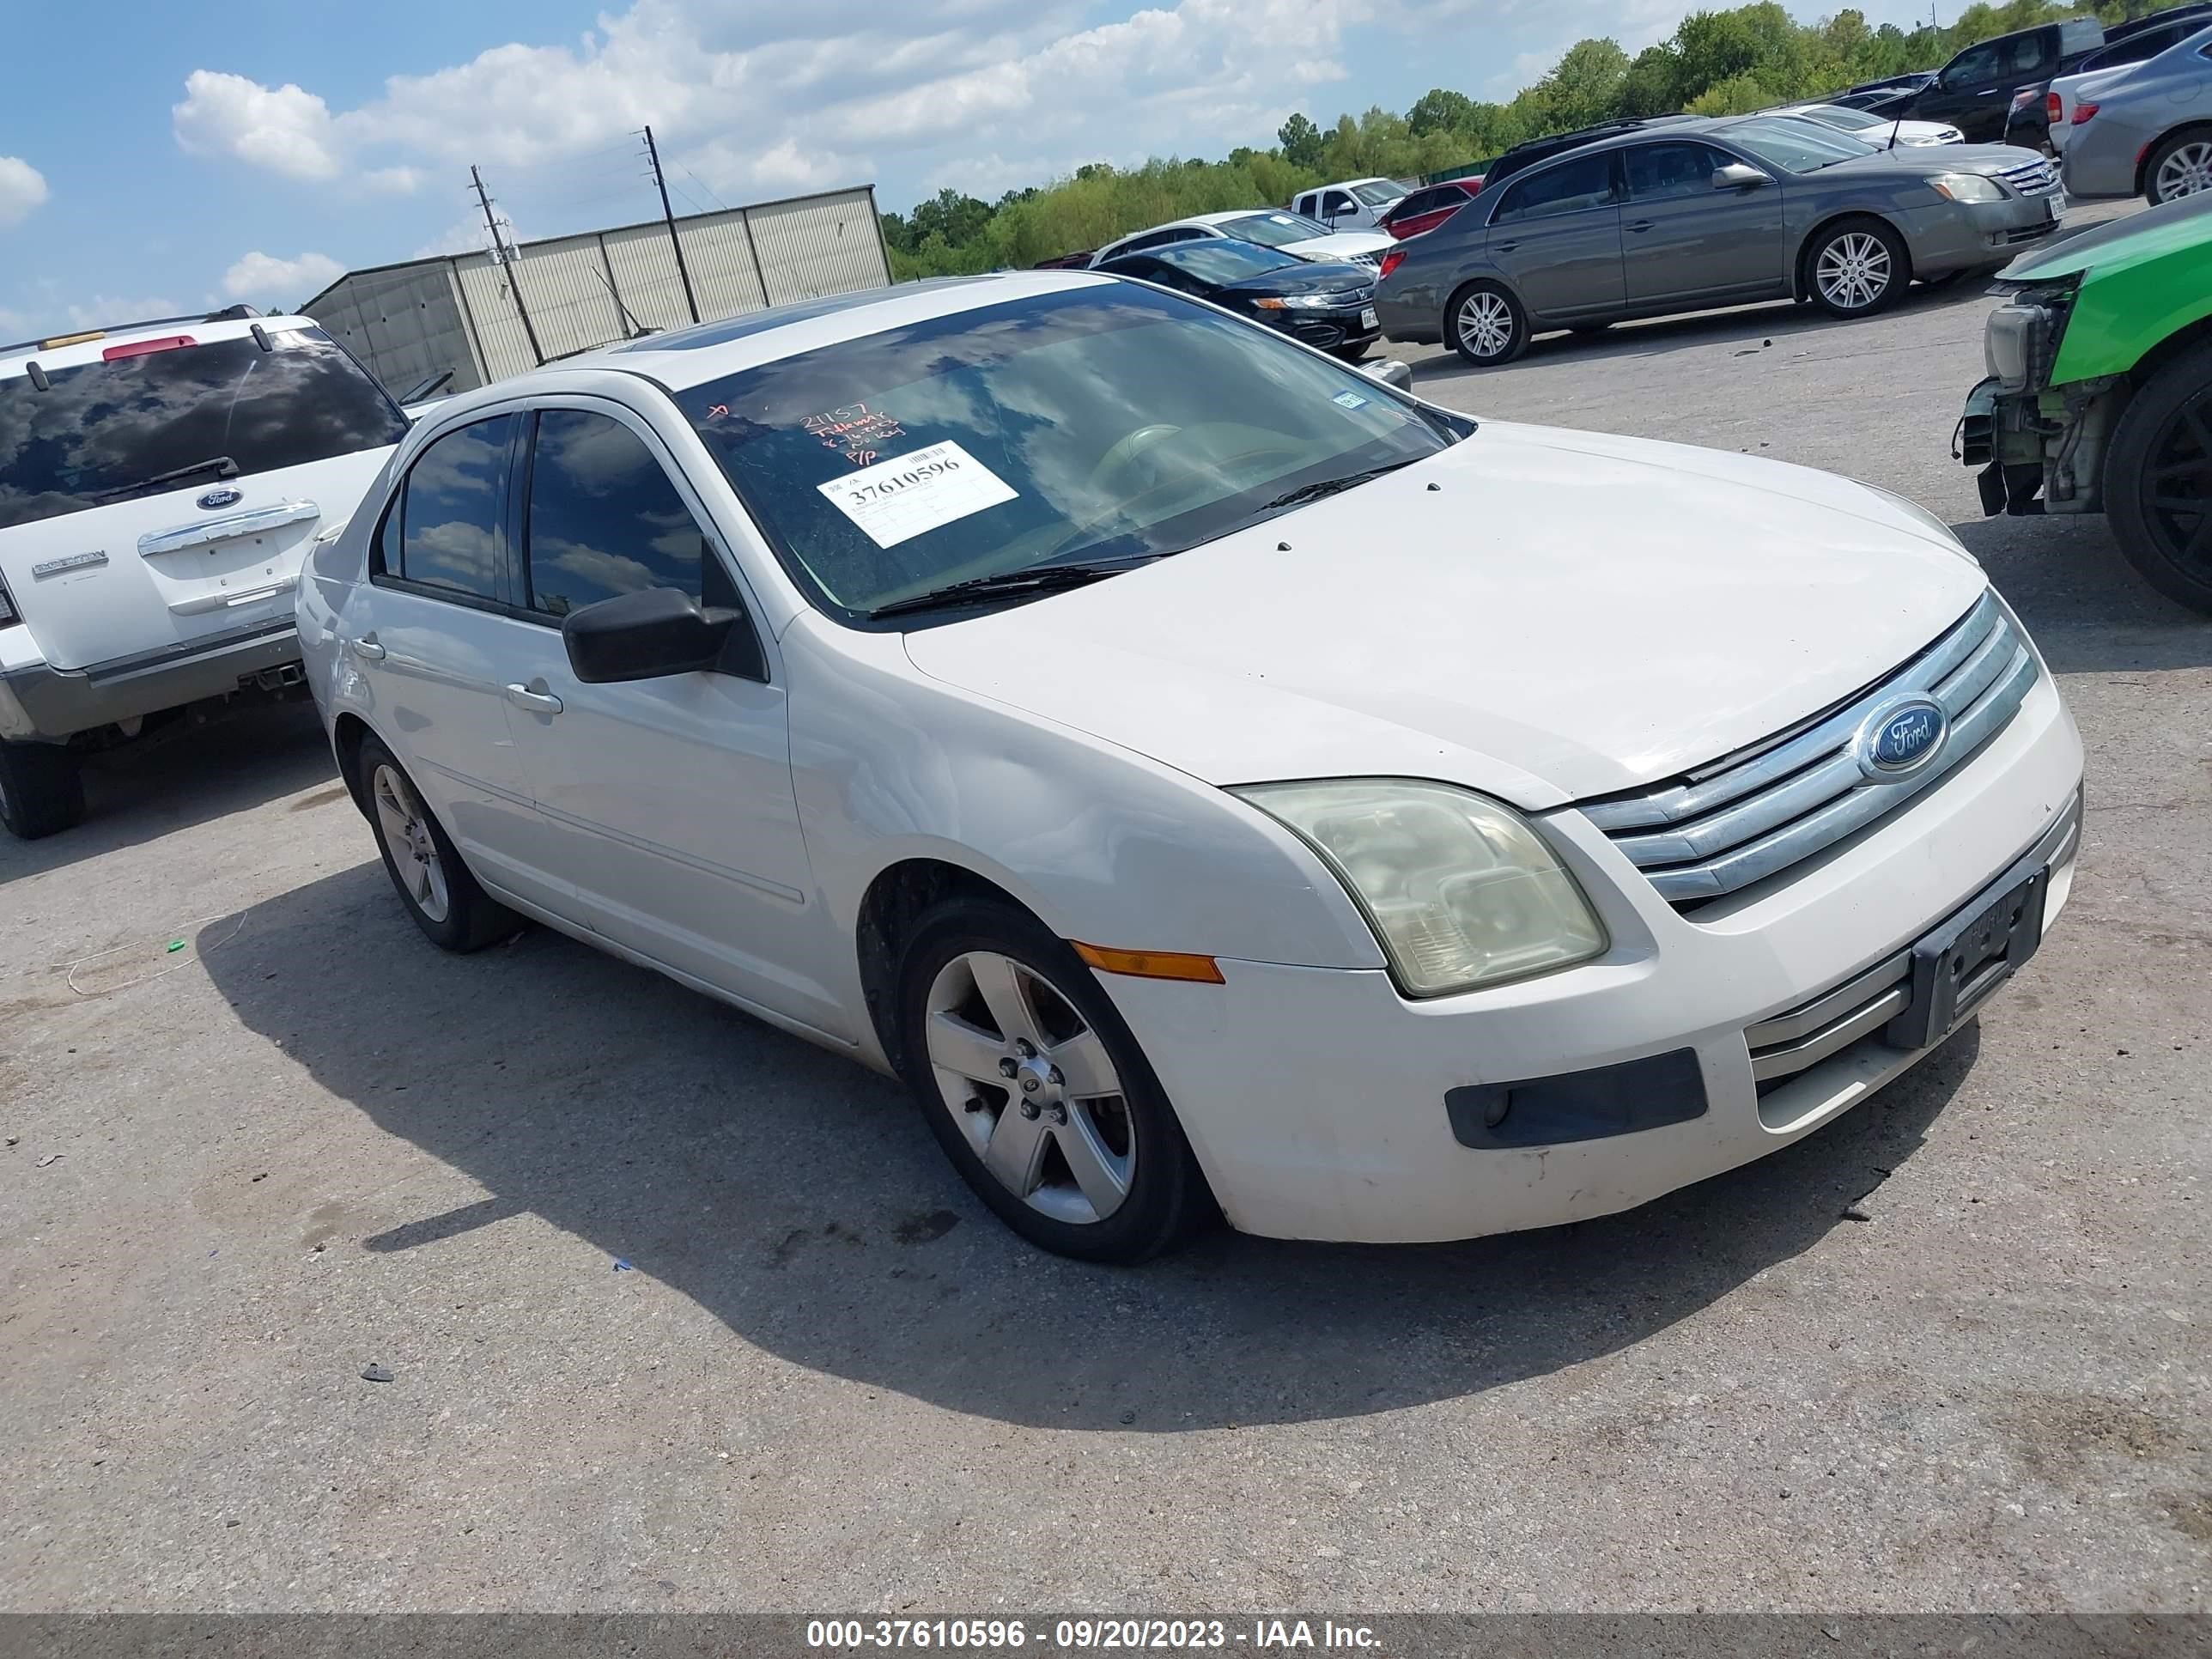 vin: 3FAHP07Z98R192216 3FAHP07Z98R192216 2008 ford fusion 2300 for Sale in 77038, 2535 West Mt. Houston Road, Houston, Texas, USA